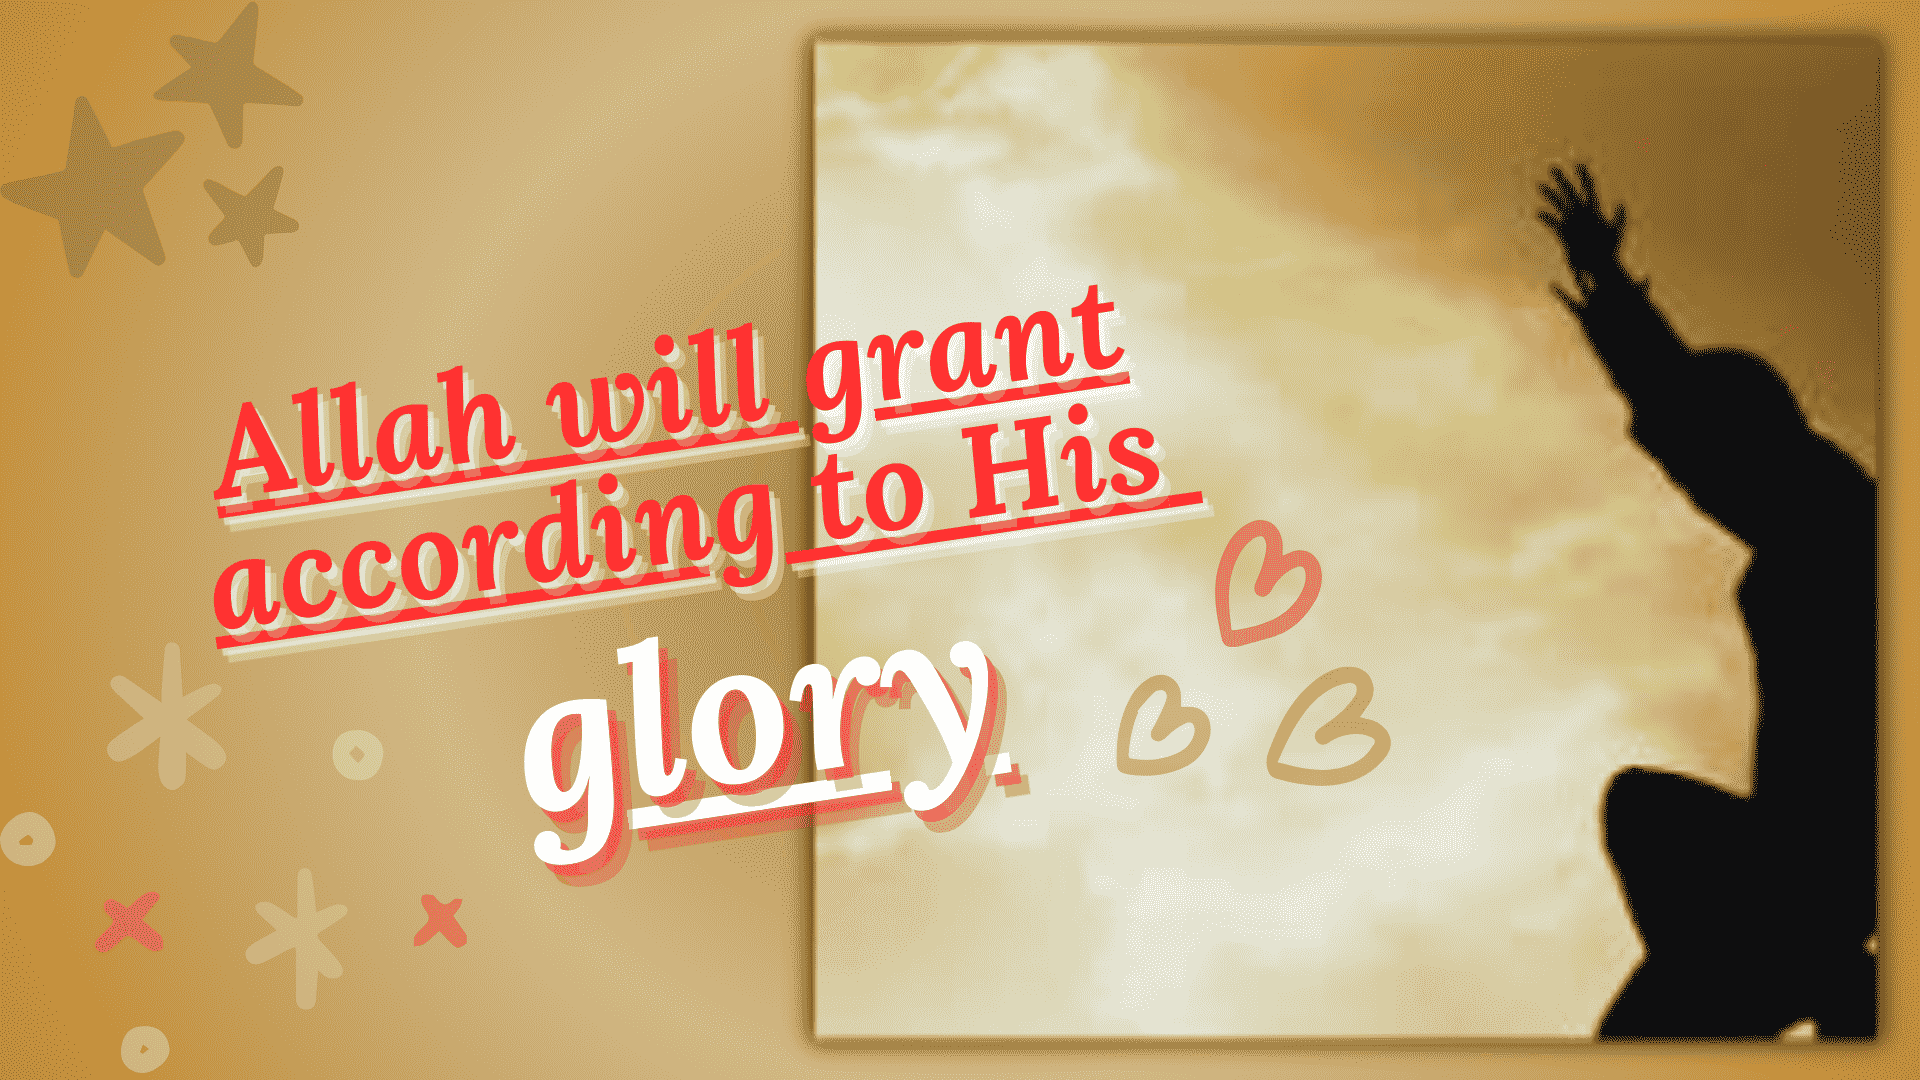 Allah will grant according to His glory